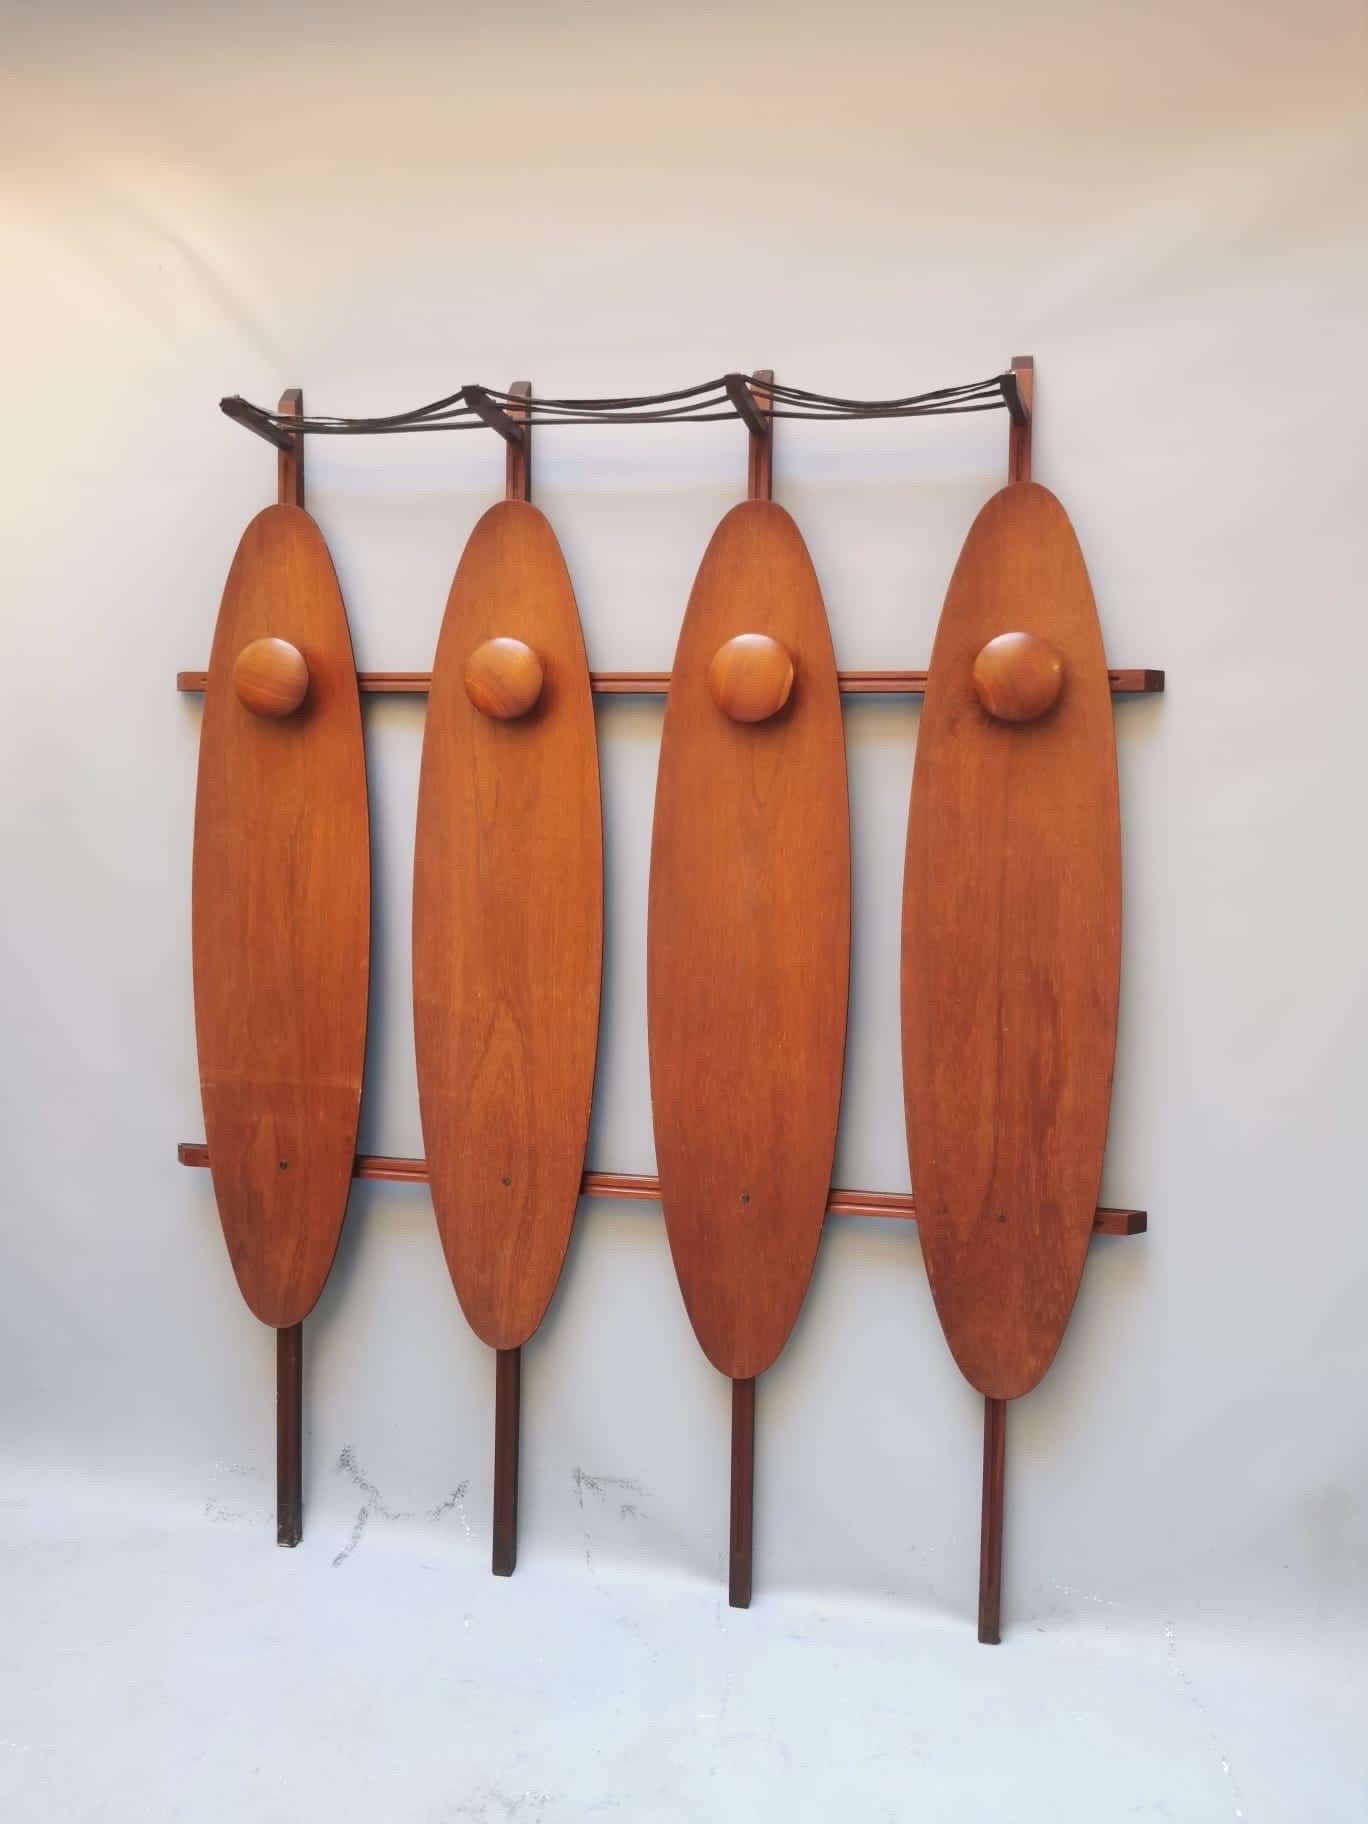 This object is one of a kind, a wall hanger of the highest manufacture, which represents the elegance of the objects designed and produced in the 50s. The object in good condition, did not need restoration, however the age naturally left him some